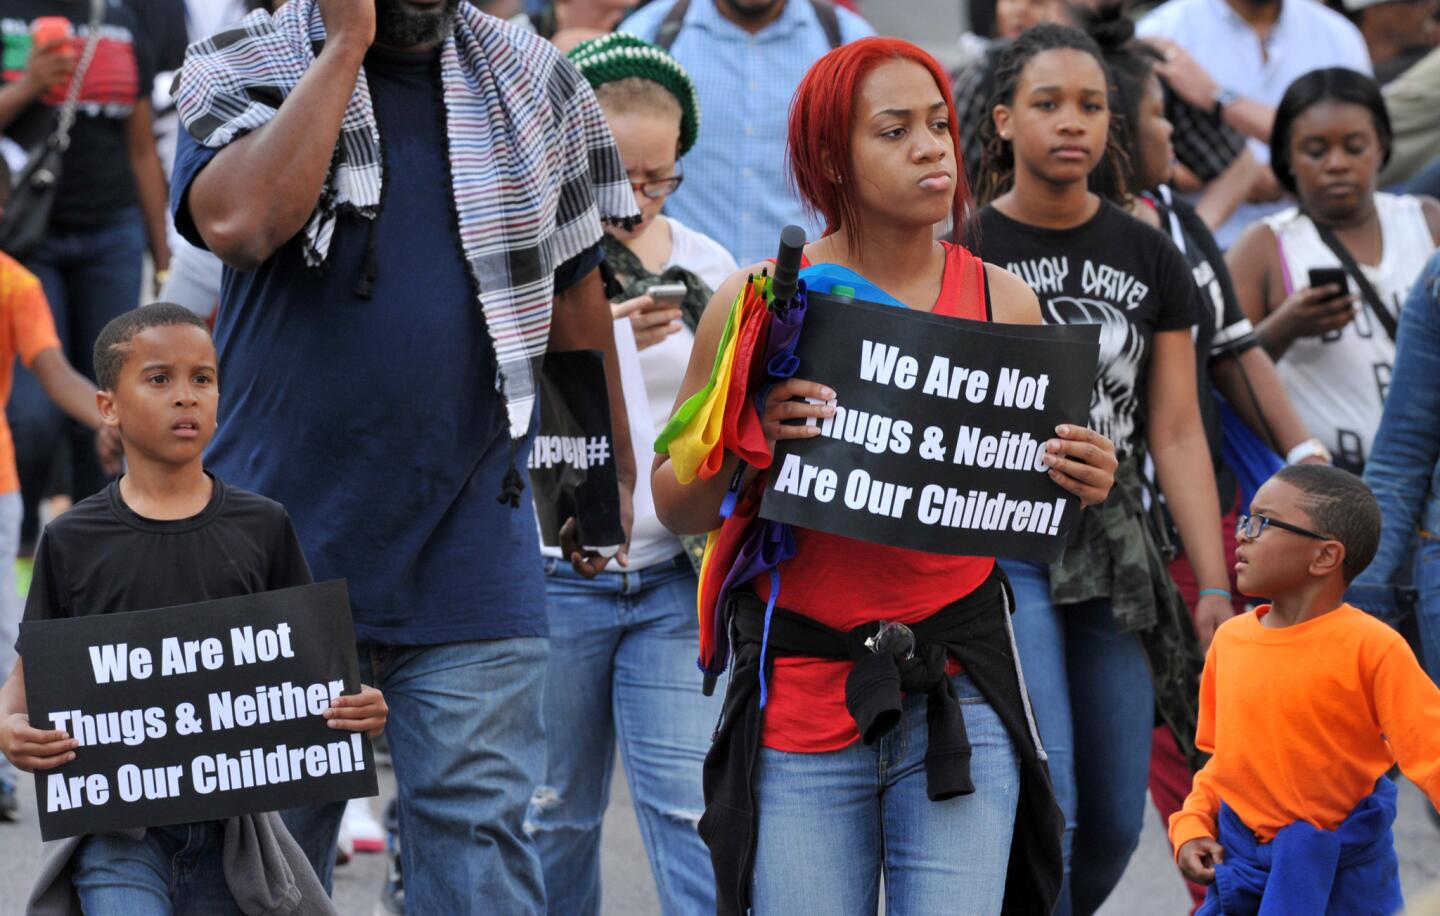 Holding signs reading, "We are not thugs & neither are our children," a group of protesters march from Penn North to City Hall on Thursday in Baltimore.